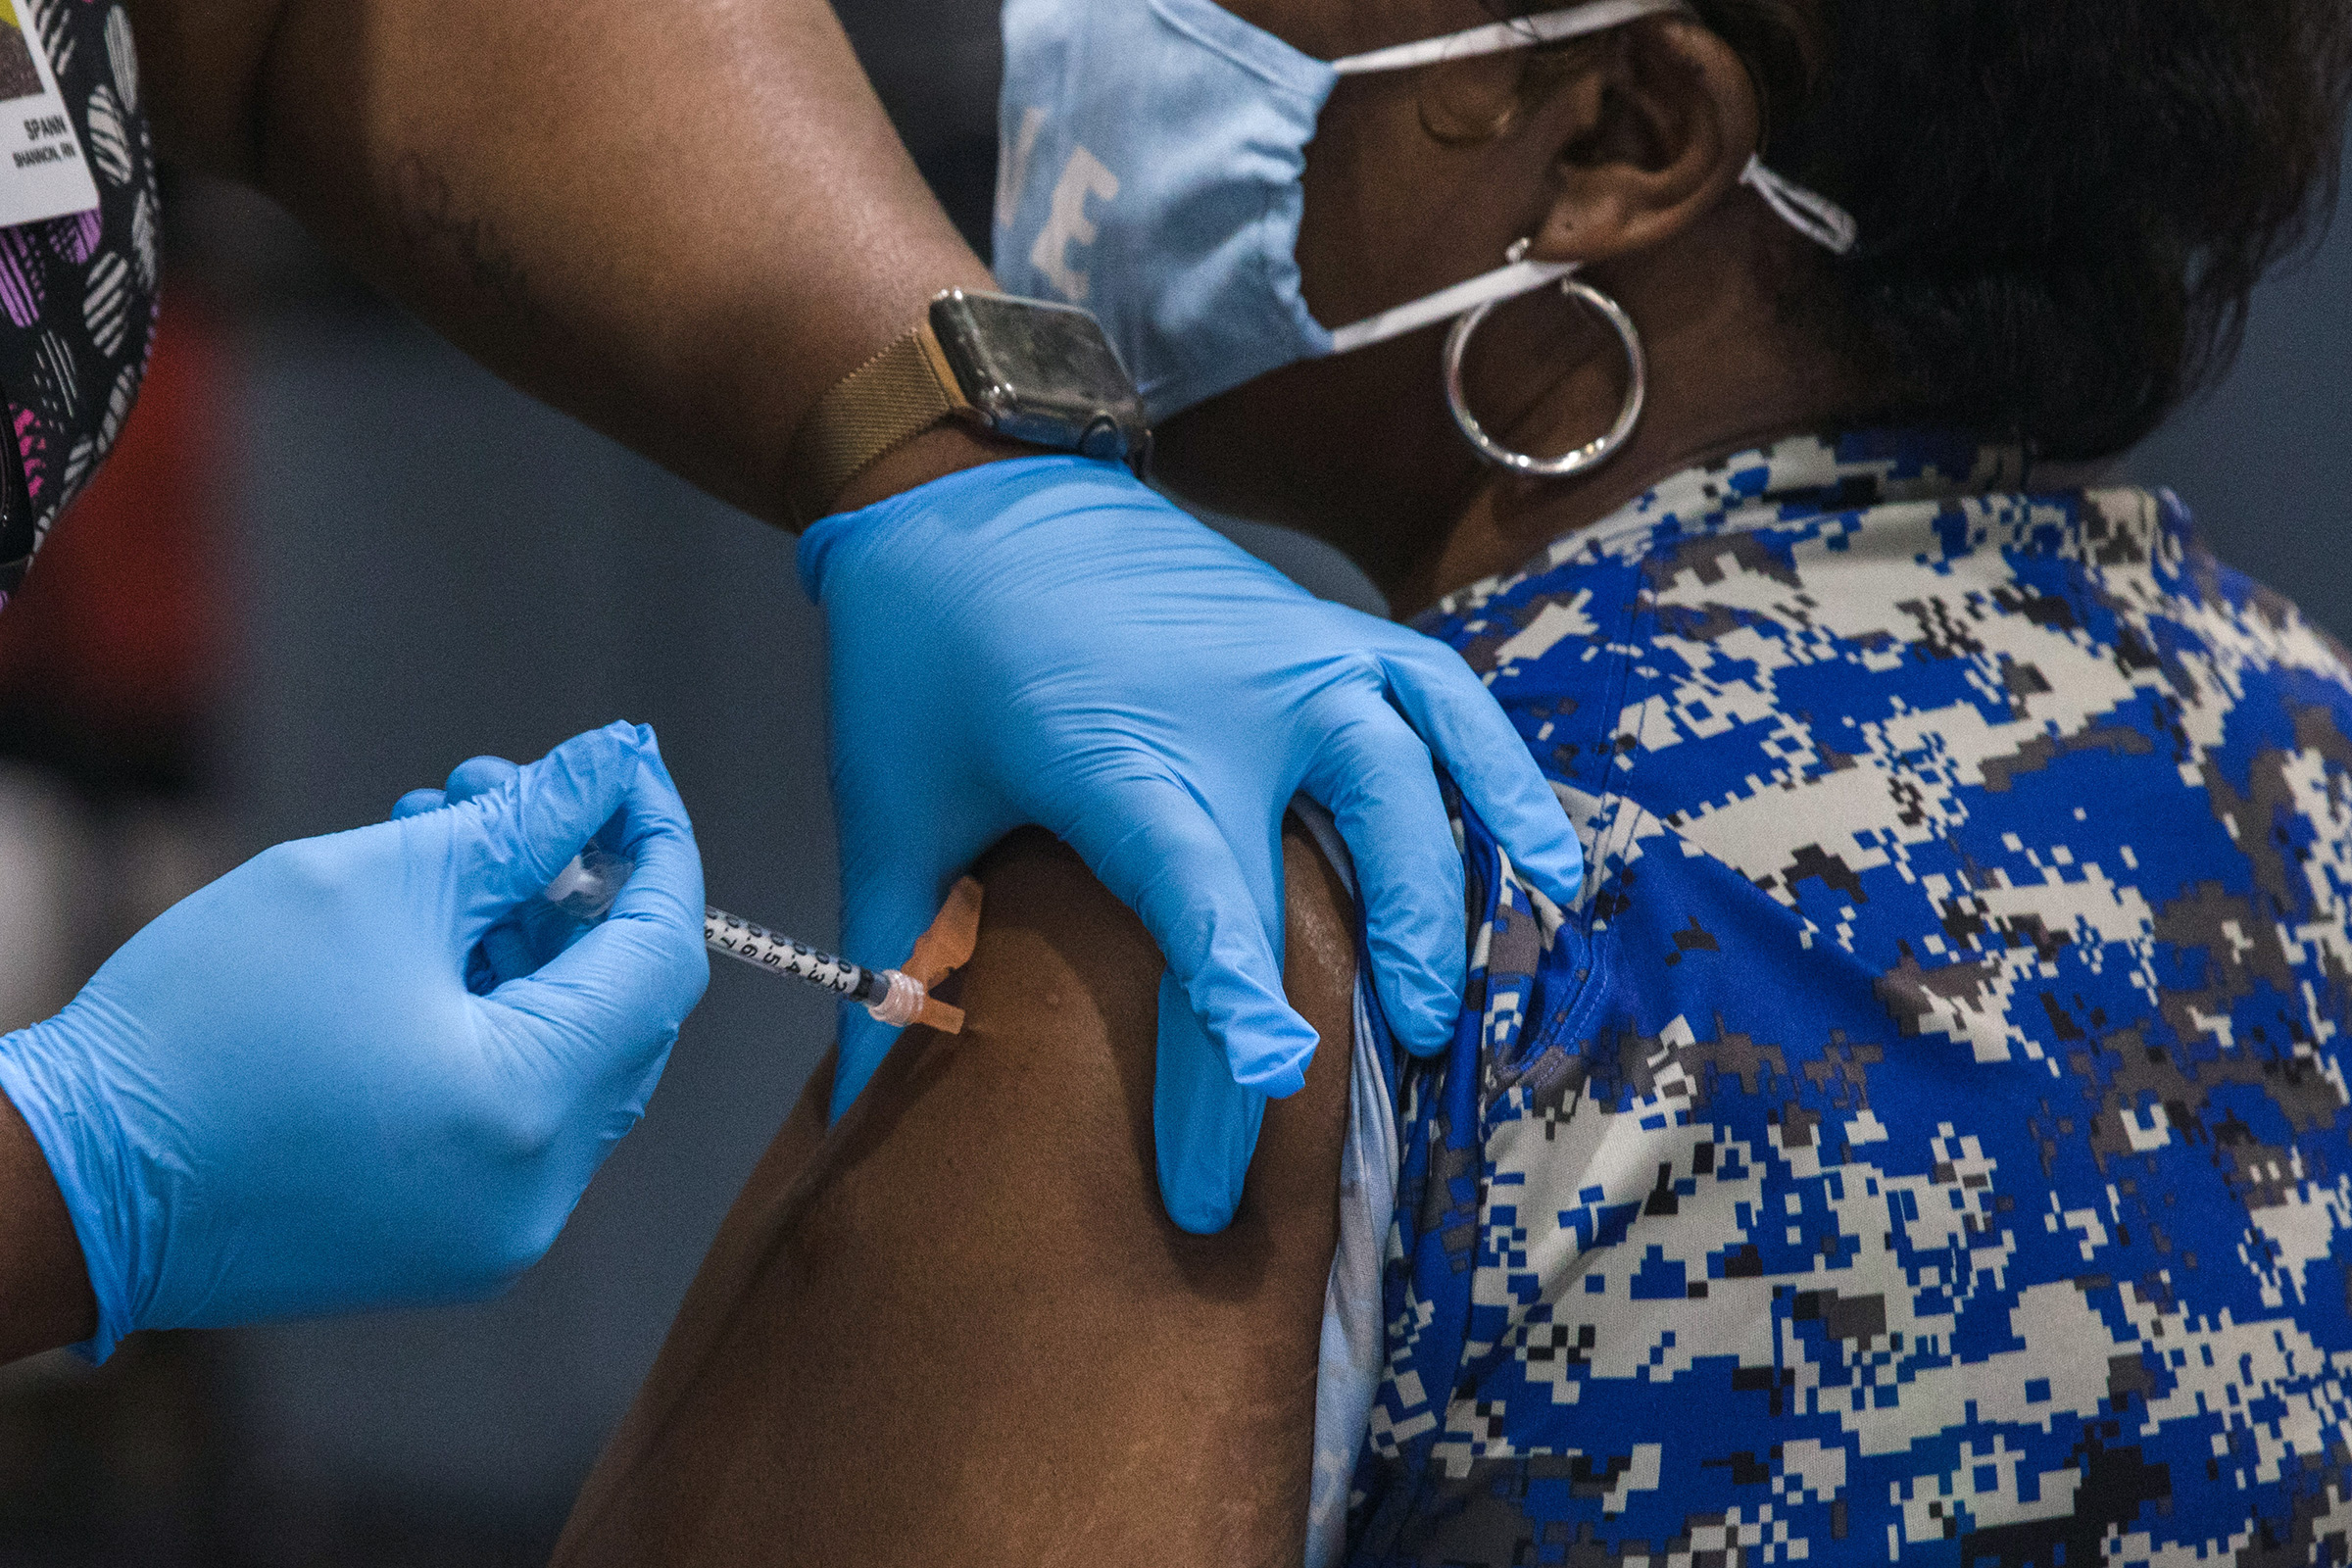 A healthcare worker administers a dose of the Pfizer-BioNTech Covid-19 vaccine to a staff member of the Clarendon School District at Manning High School in Manning, South Carolina, U.S., on Friday, March 12, 2021. (Micah Green—Bloomberg/Getty Images)